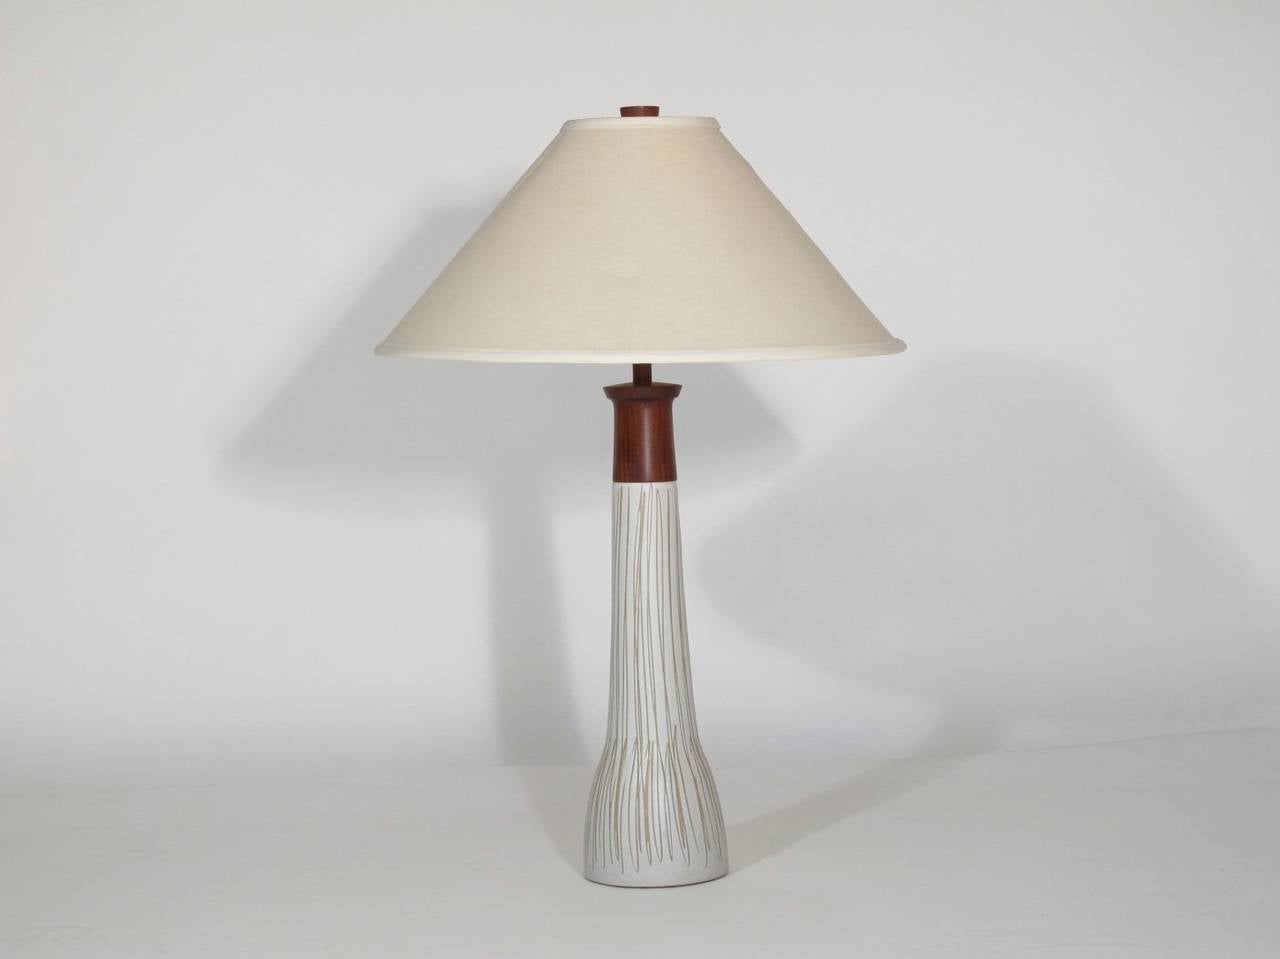 White glazed ceramic lamp with walnut neck and finial designed by Gordon Martz for Marshall Studios. Shown with original shade.